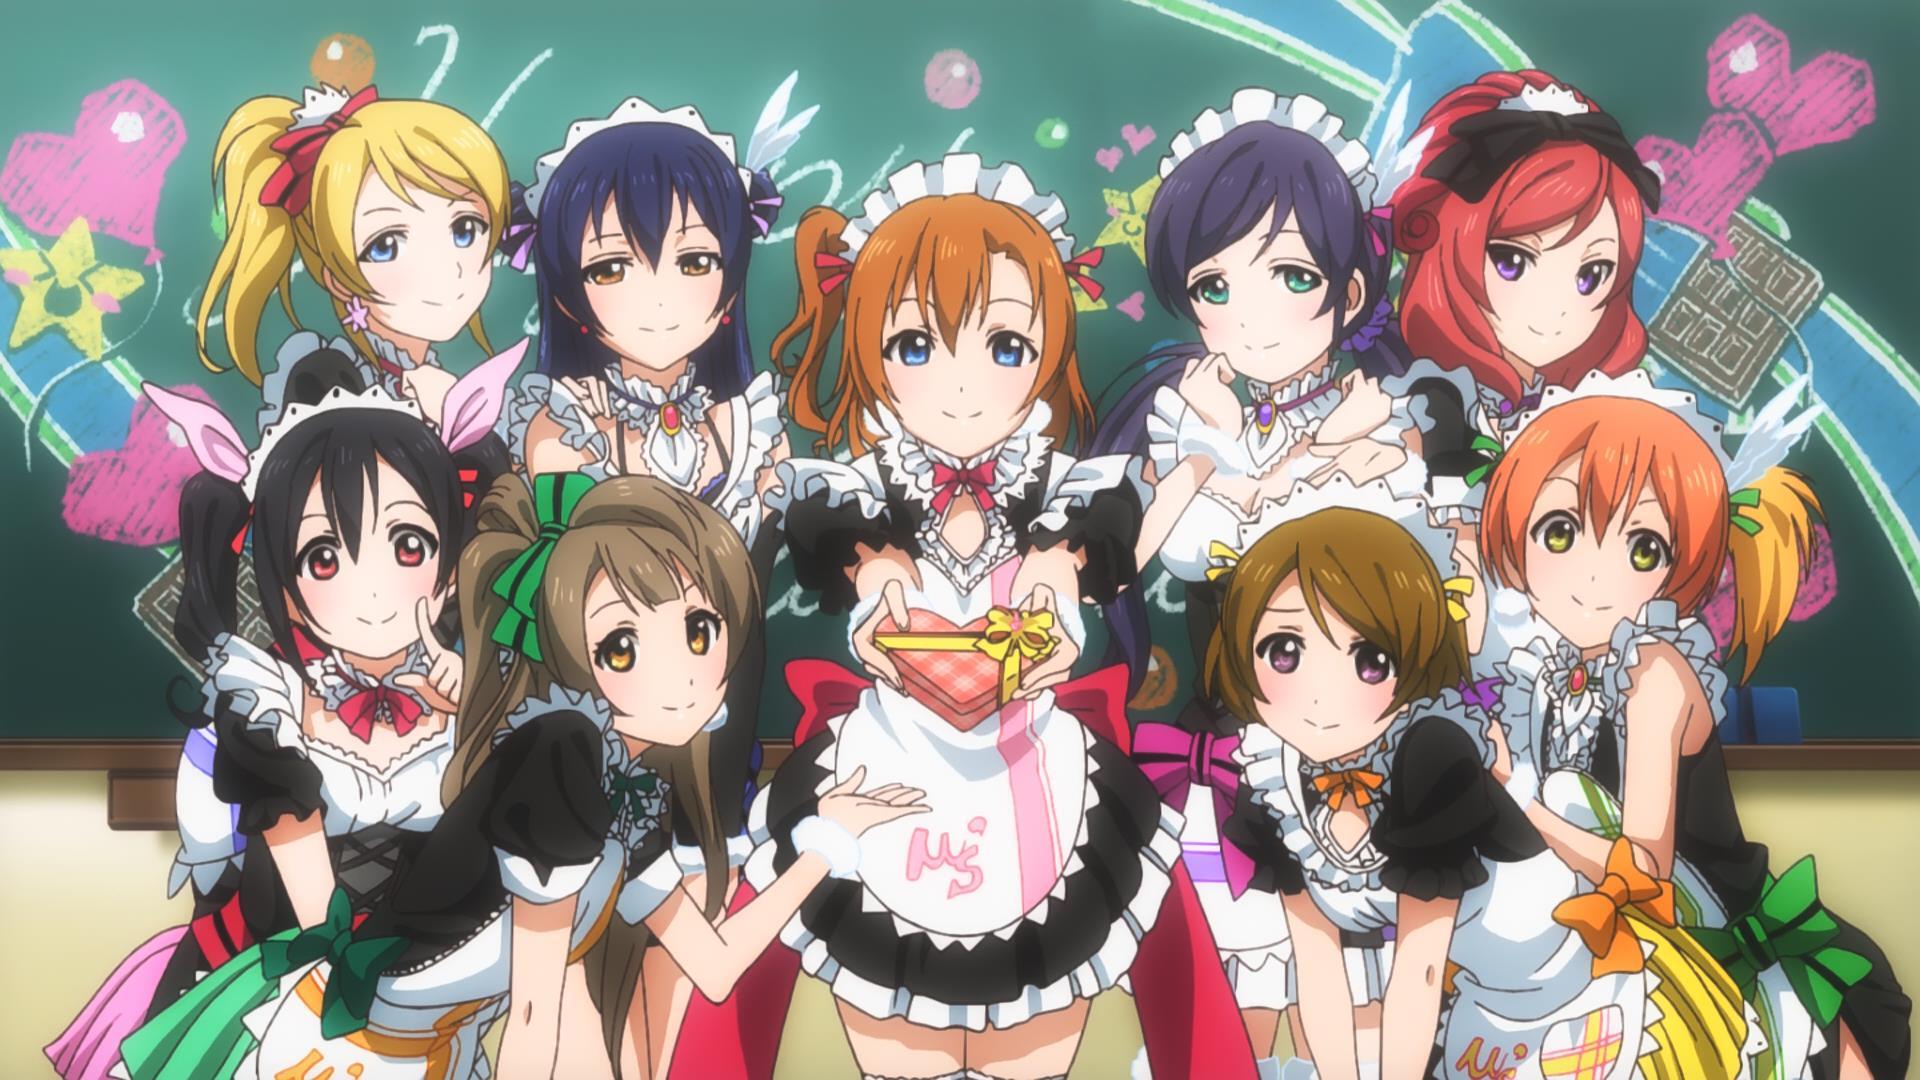 Download Wallpaper From Anime Love Live With Tags